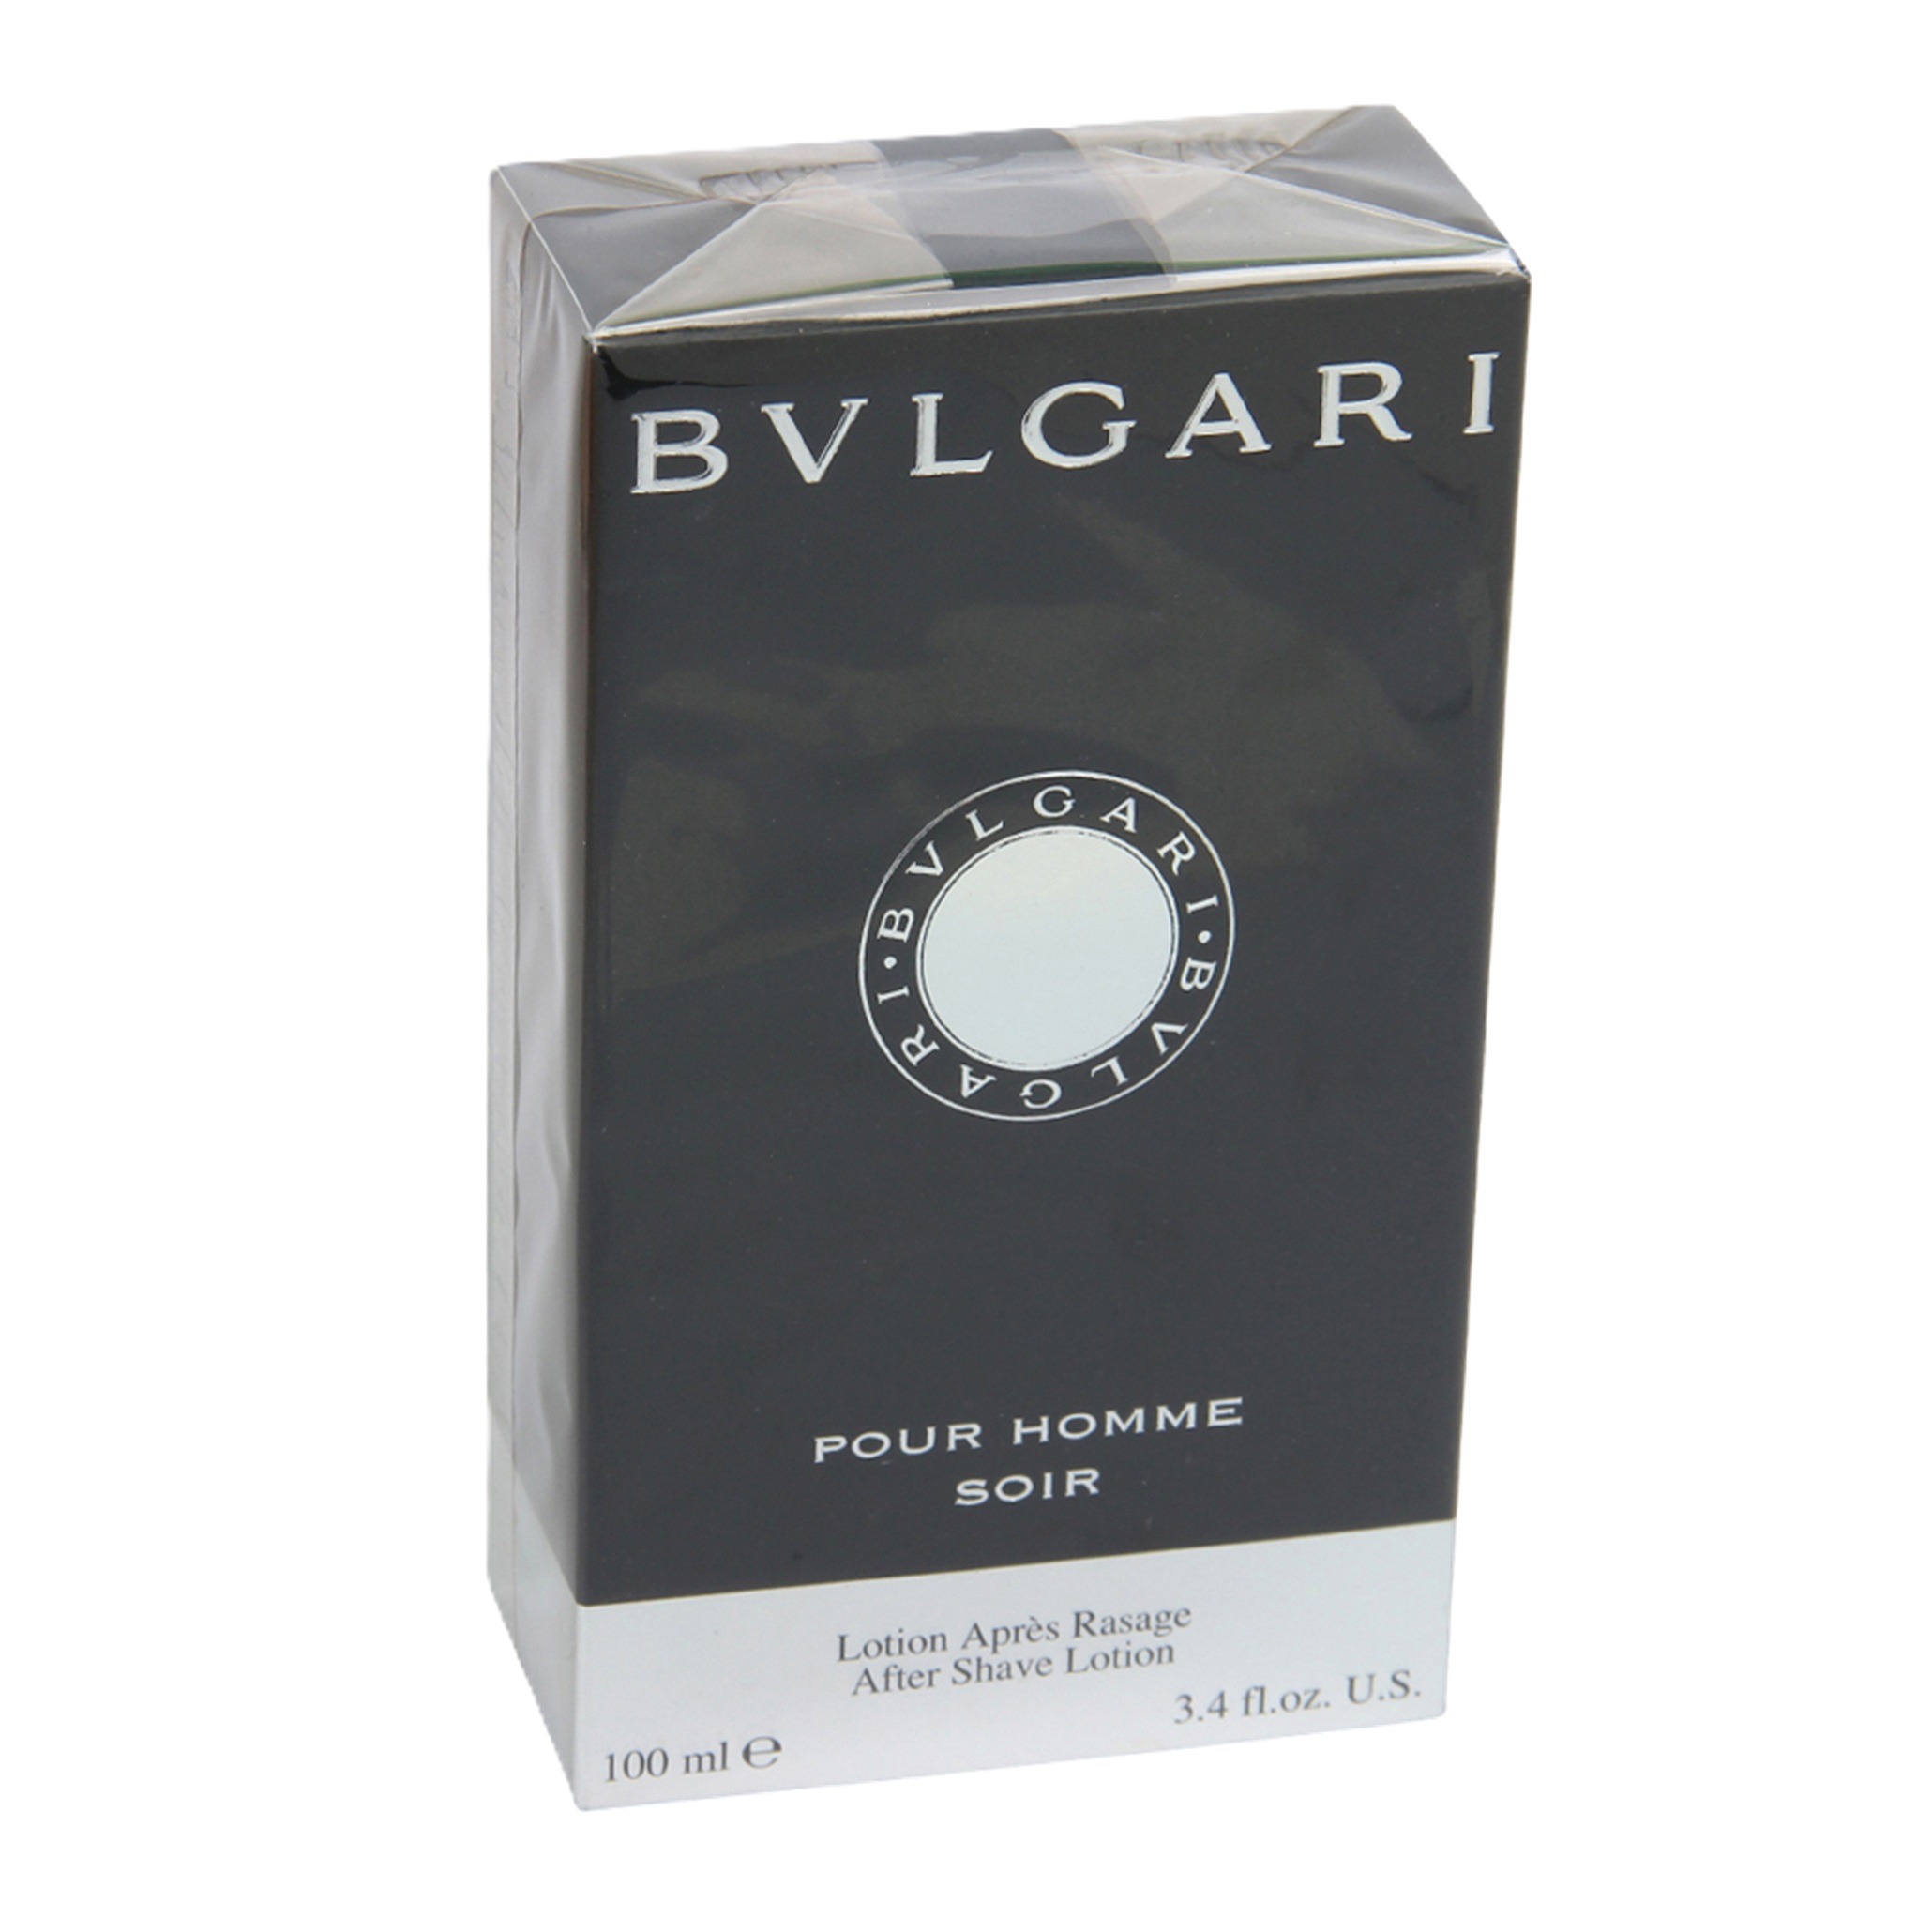 Bvlgari Pour Homme Soir After Shave Lotion 100ml